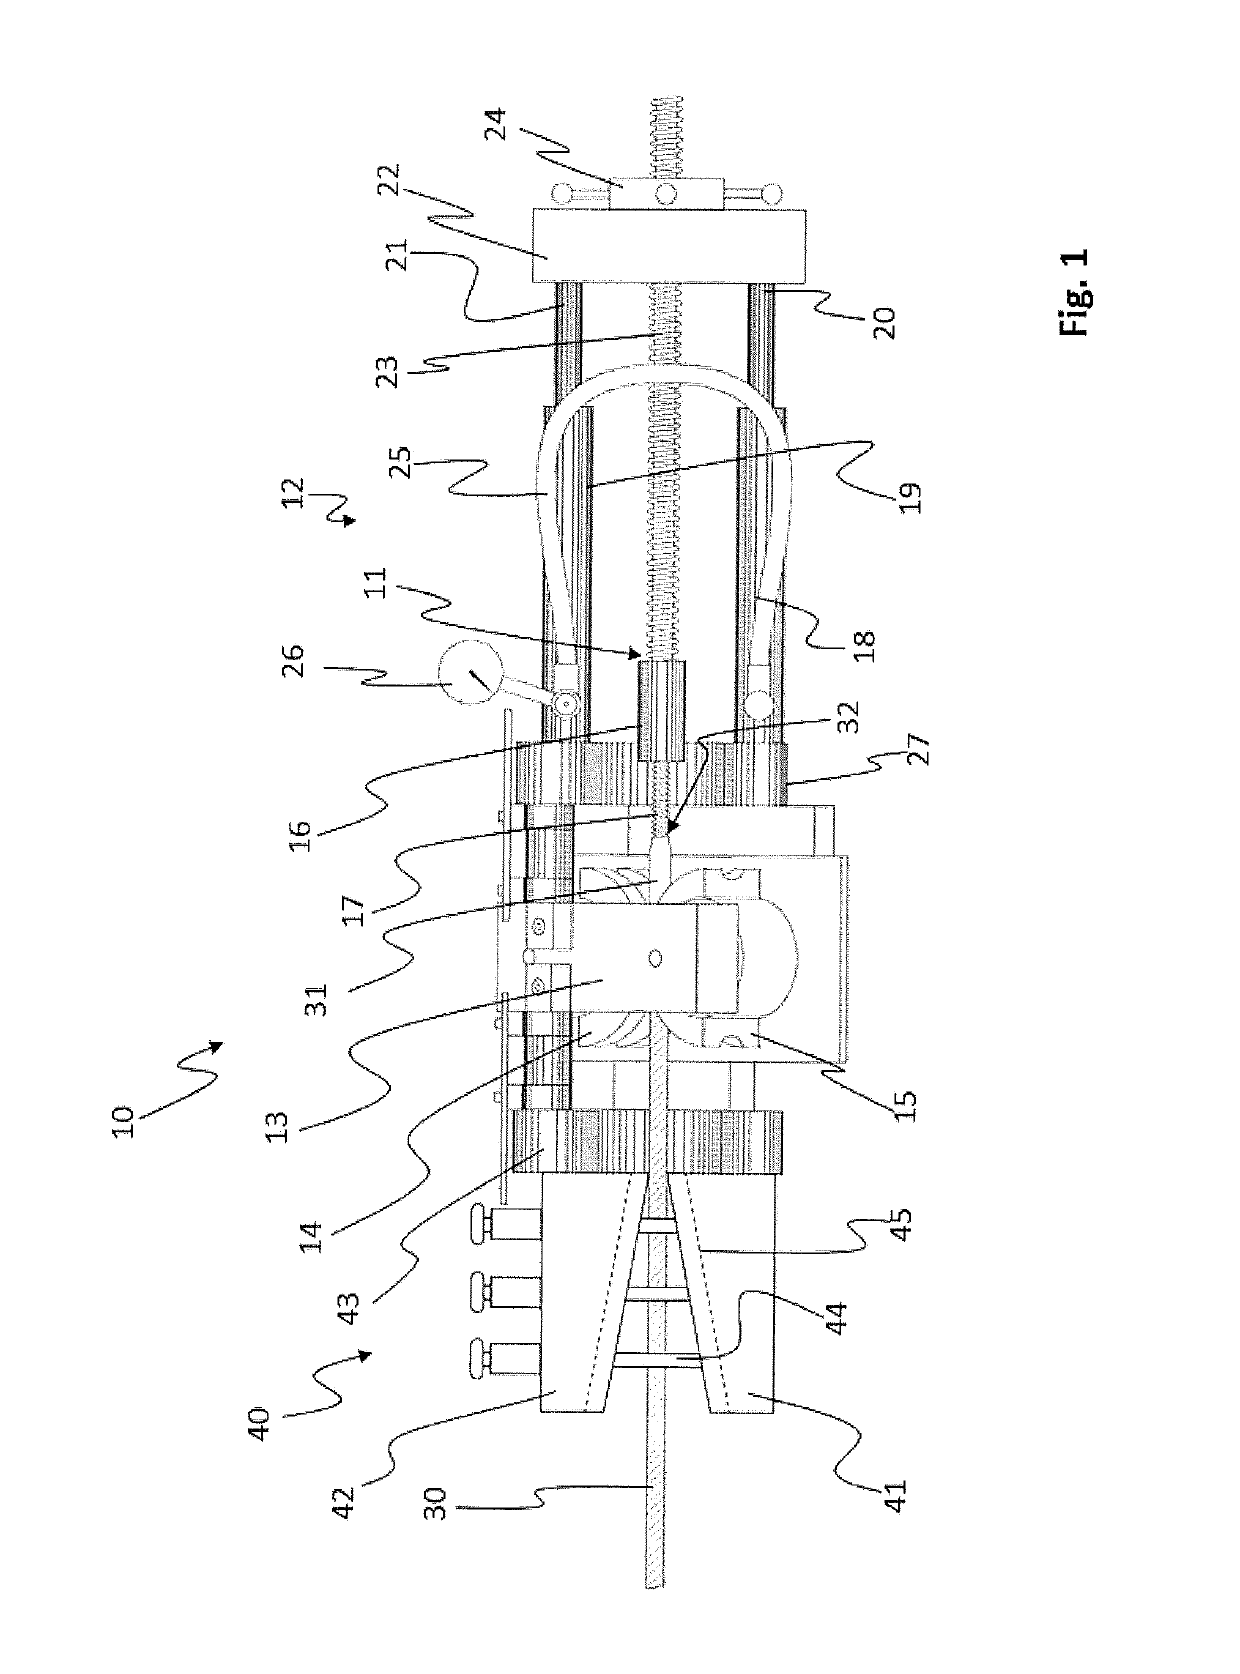 Apparatus and method for attaching and testing a sleeve with a coupling end to a steel wire